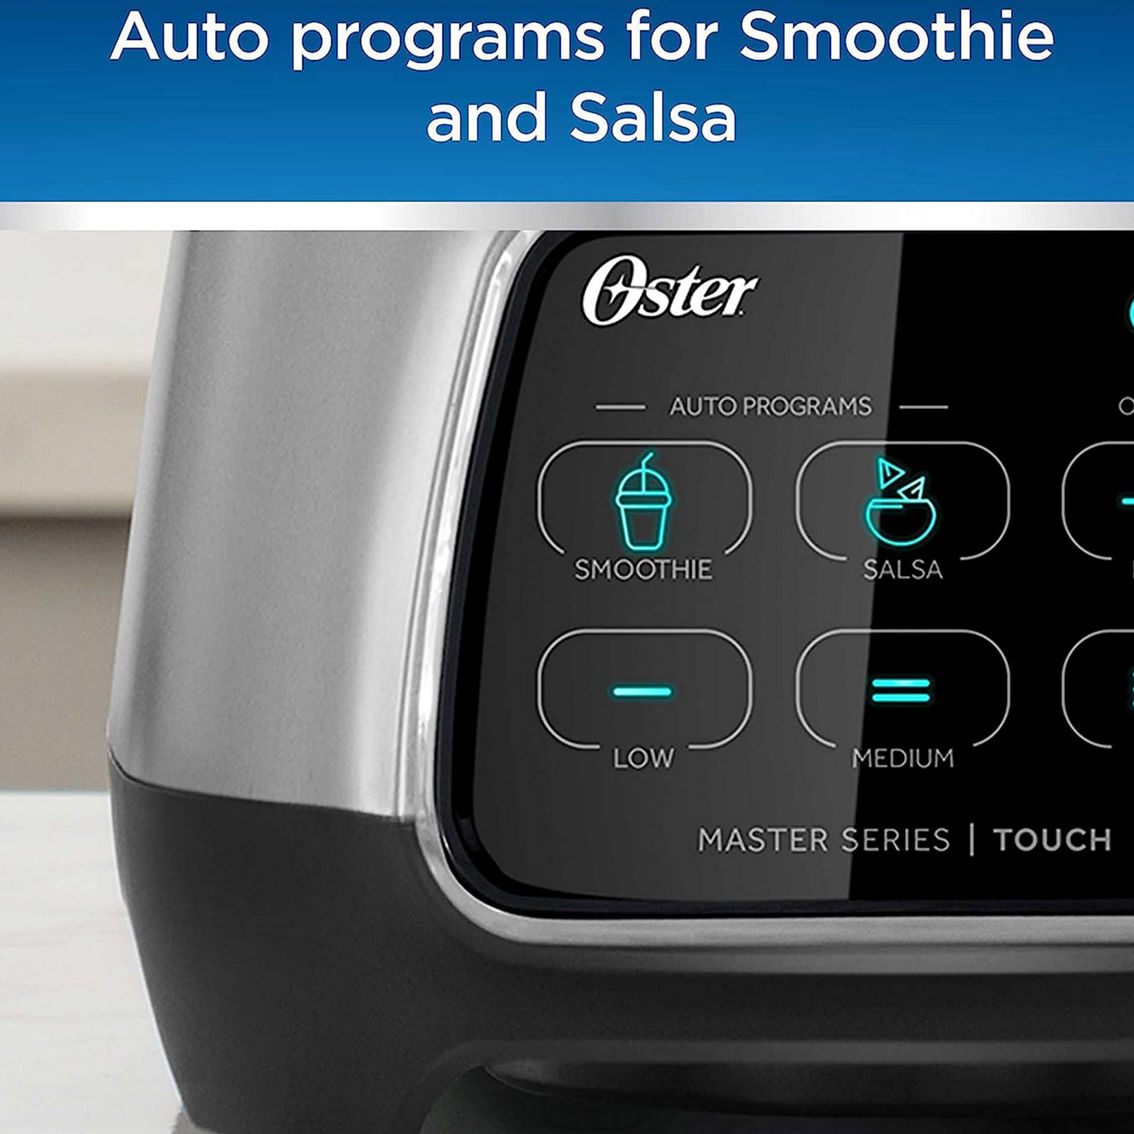 Oster Master Series Touch Screen 6 Speed 6 Cup 800 Watt Blender in Matte Silver - Image 3 of 5